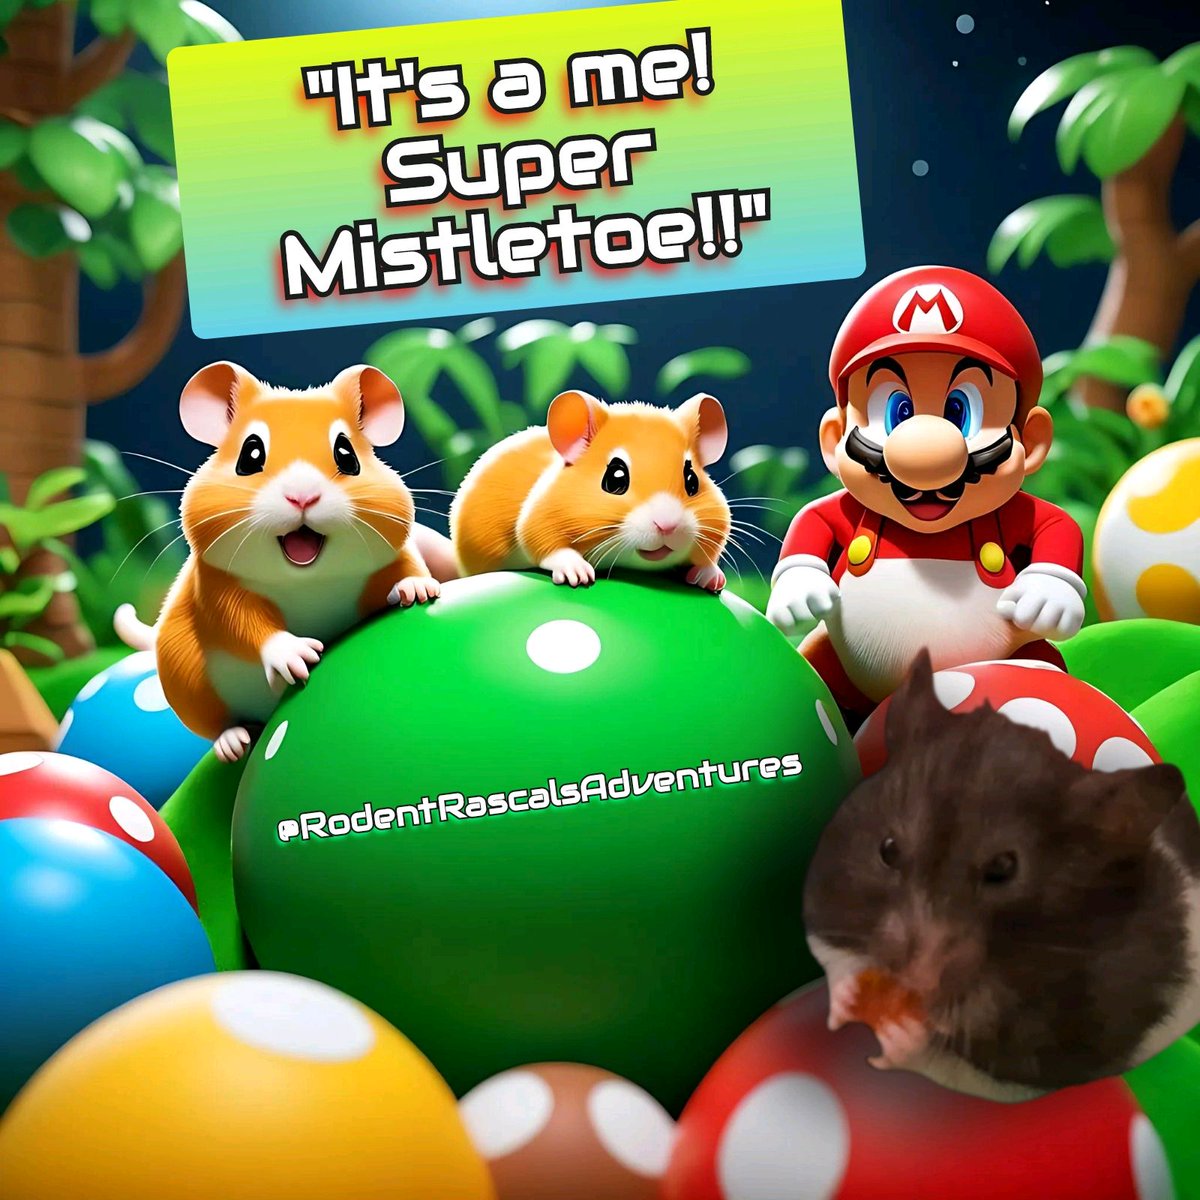 🔜🐹🍄 #SuperHamster 🦸‍♀️🐹Mistletoe here wishes YOU a #SUPERDAY filled with much HAMSTERIFIC FUN!!! Join our Hammies on our YouTube Channel this weekend for NEW #superadventures !! #hamster #cutehamster #SuperMario #pets #cutepets #GoodMorning ❤️🐹🐽🐀💻⬇️ #RodentRascalsAdventures